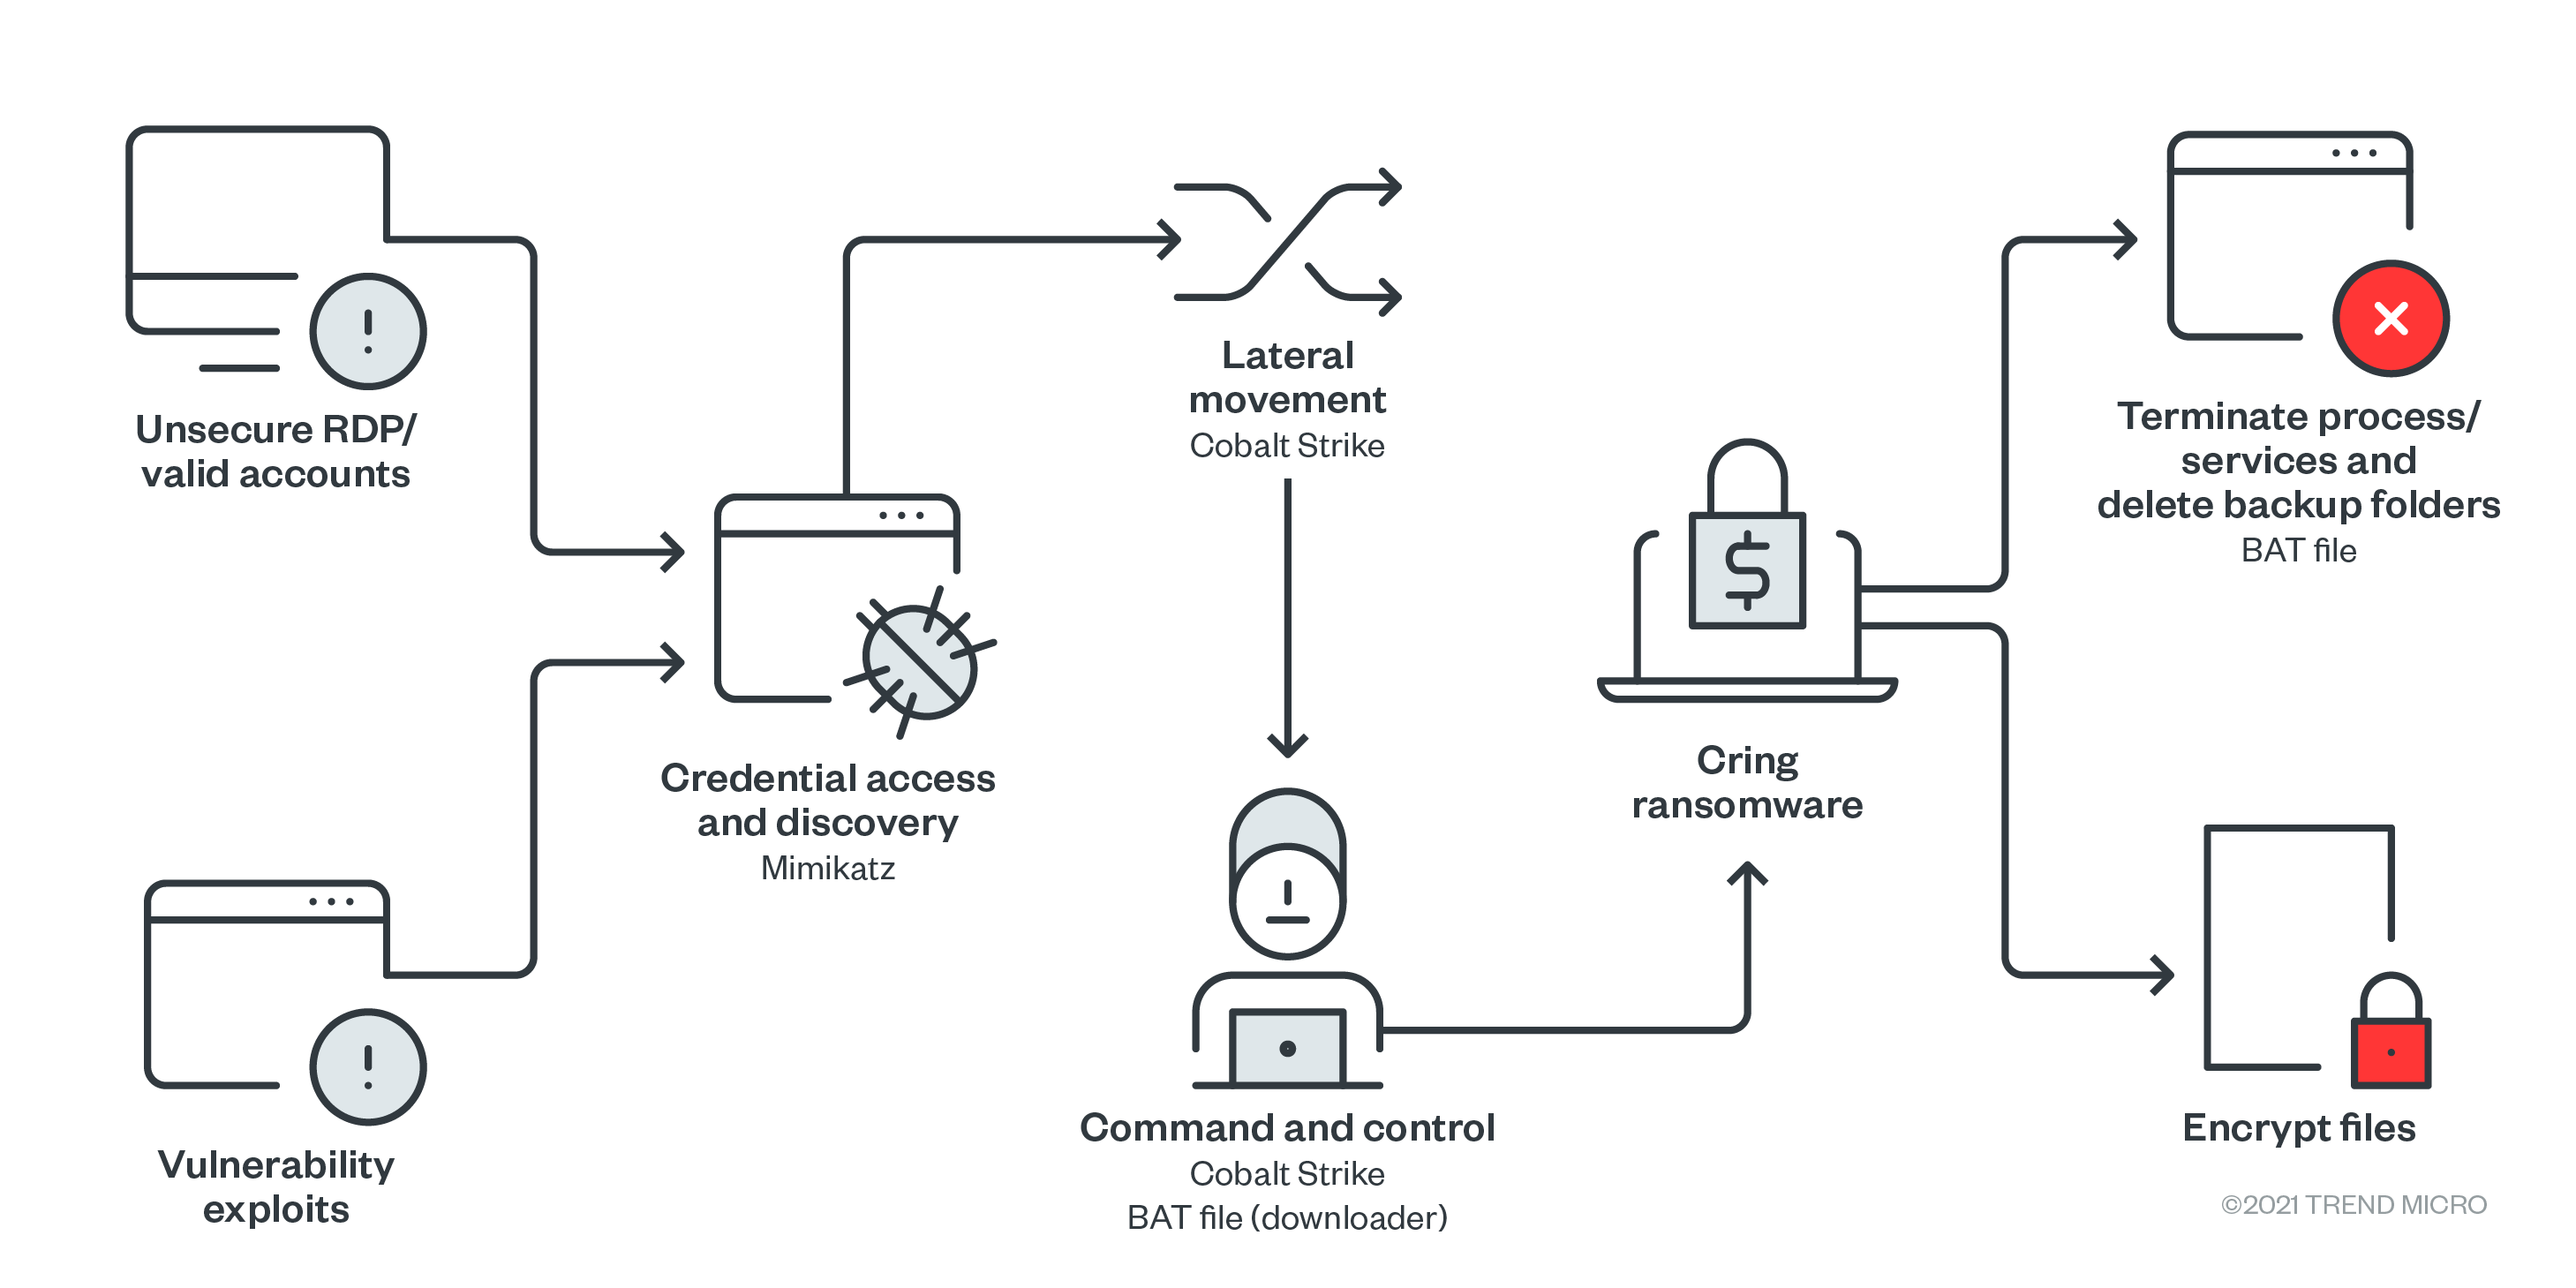 Figure 1. The Cring ransomware infection chain